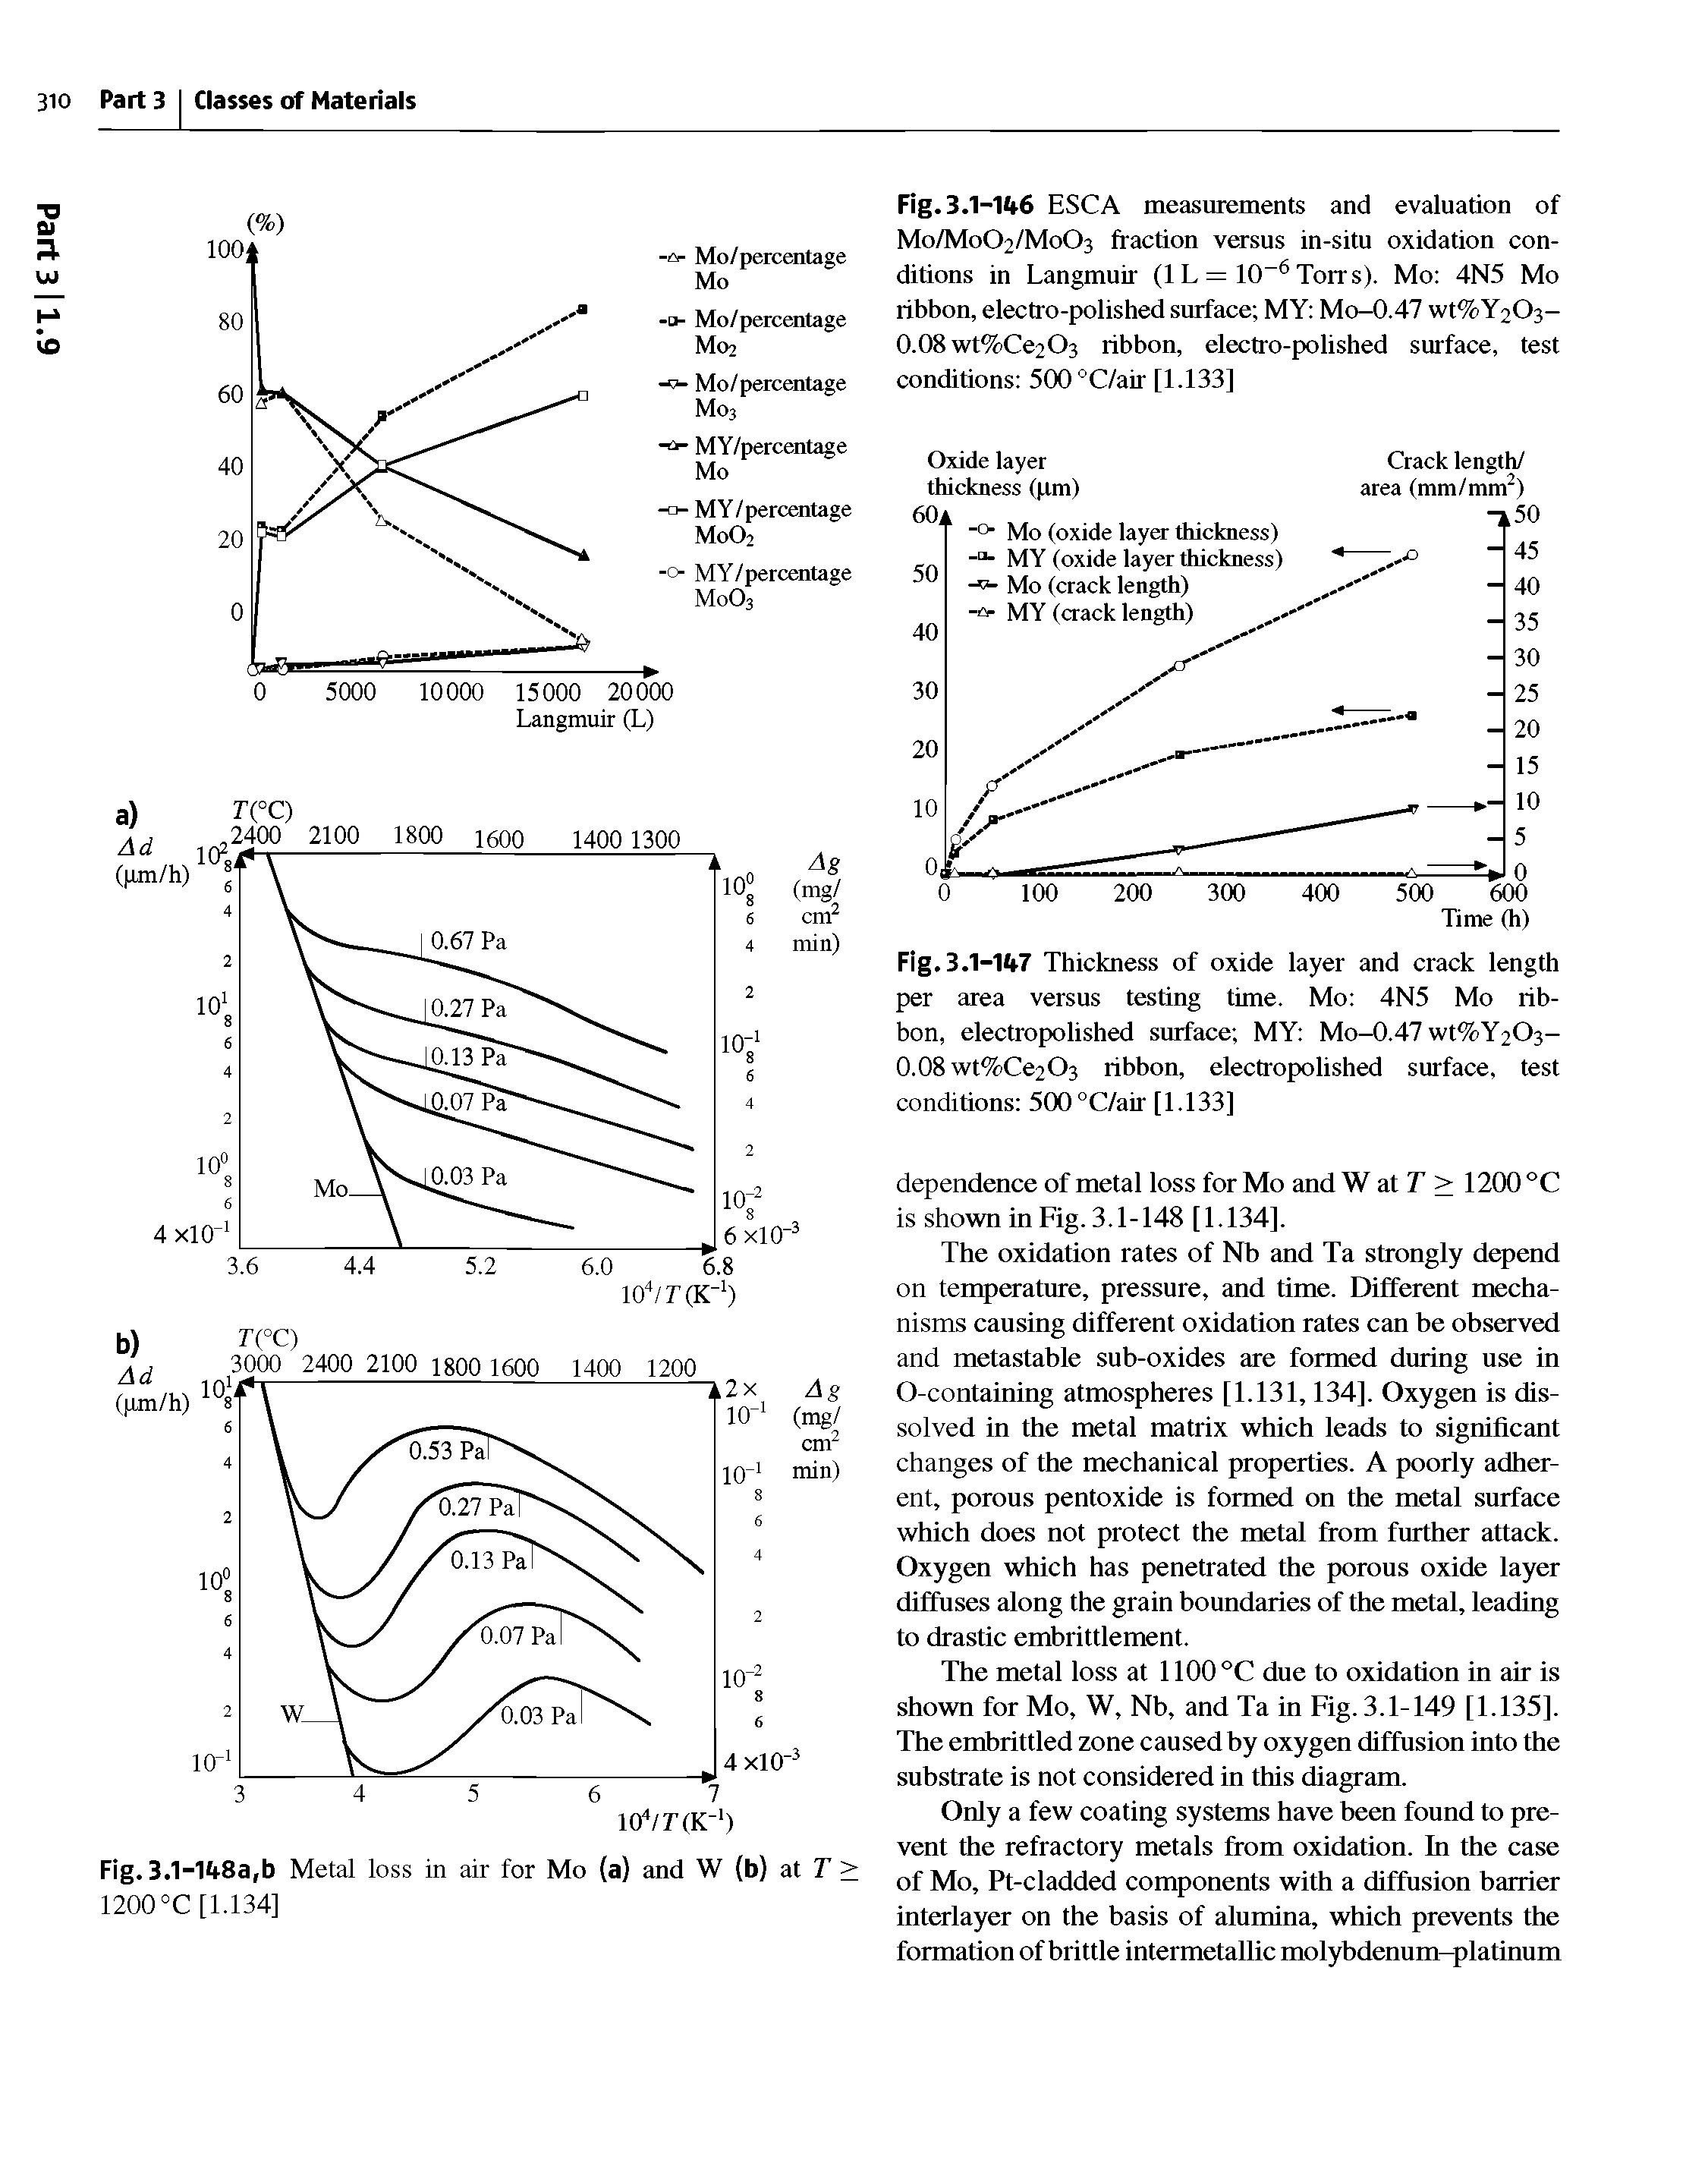 Fig. 3.1-147 Thickness of oxide layer and crack length per area versus testing time. Mo 4N5 Mo ribbon, electropolished surface MY Mo-0.47wt%Y2O3-0.08wt%Ce203 ribbon, electropolished surface, test conditions 5(X)°C/air [1.133]...